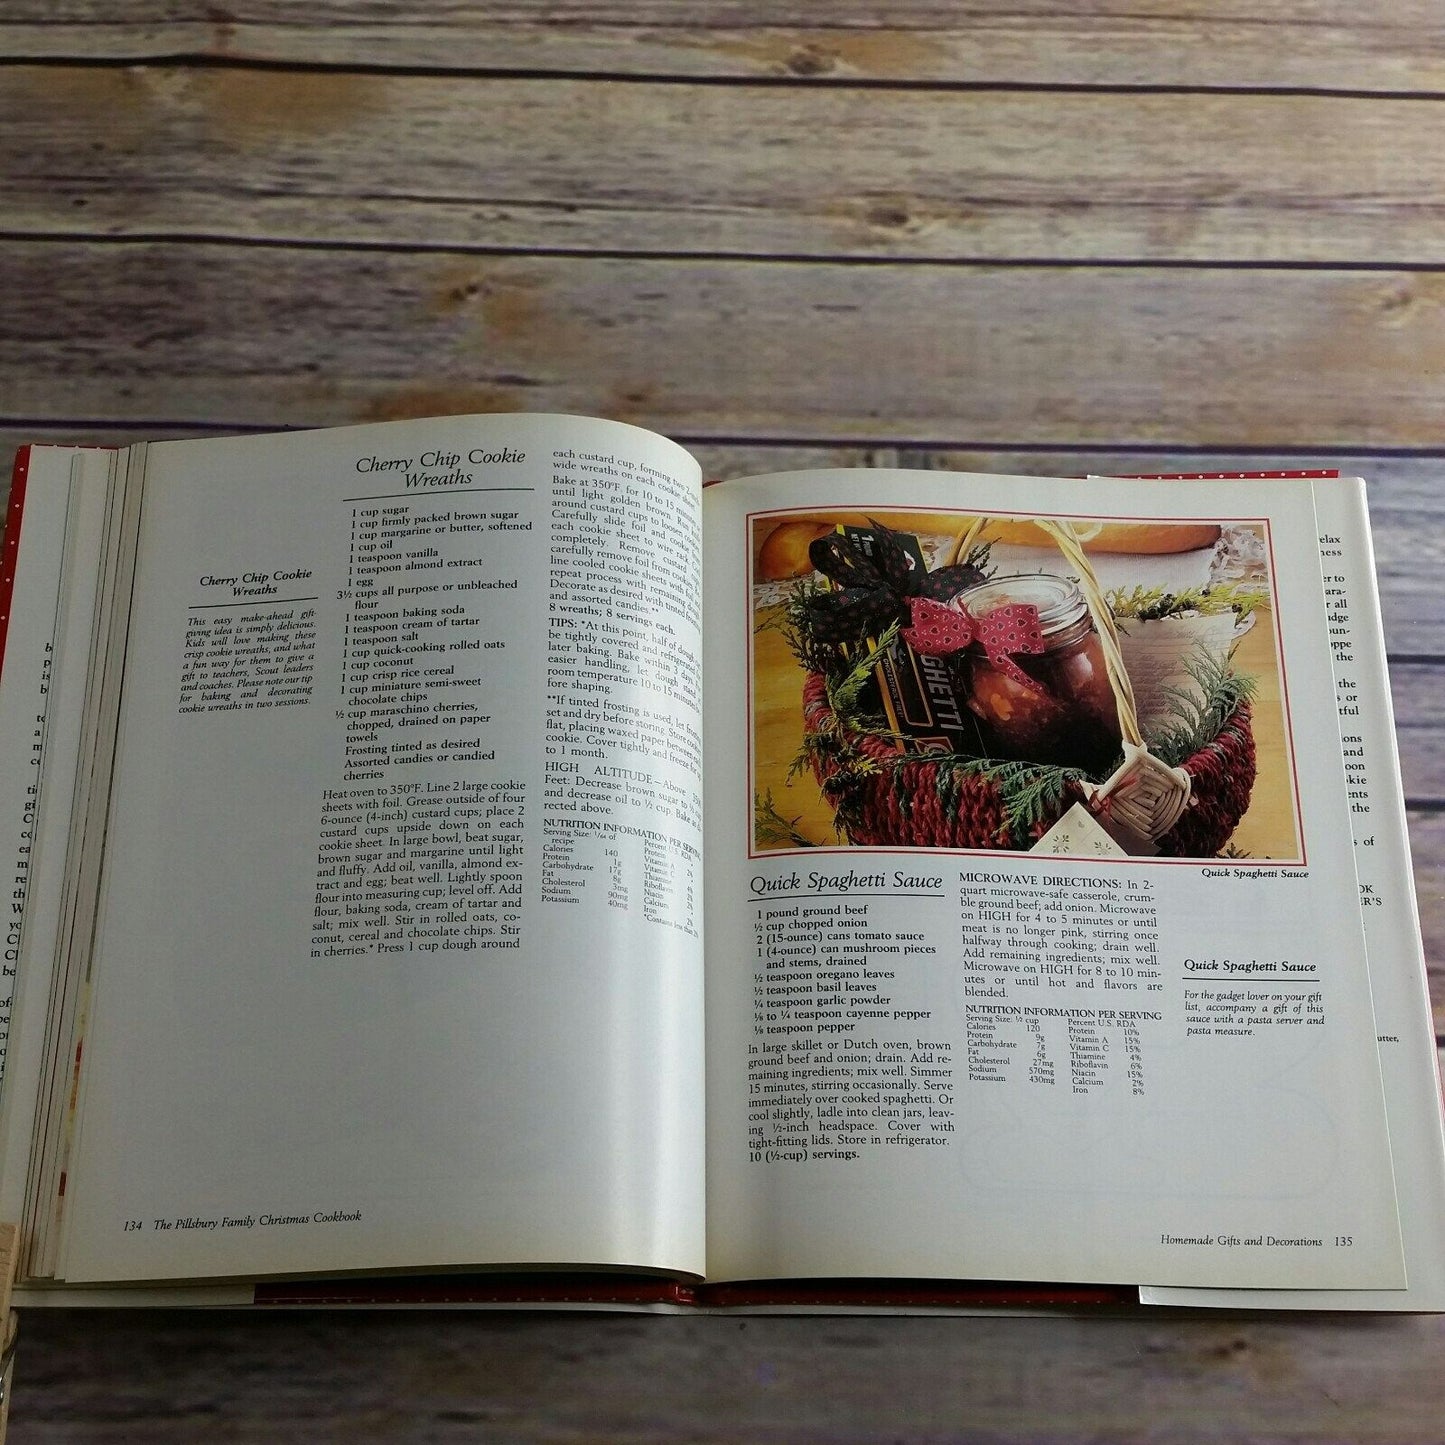 Vintage Cookbook Pillsbury Family Christmas Recipes 1991 Hardcover with Dust Jacket More than 200 Recipes and Decorations